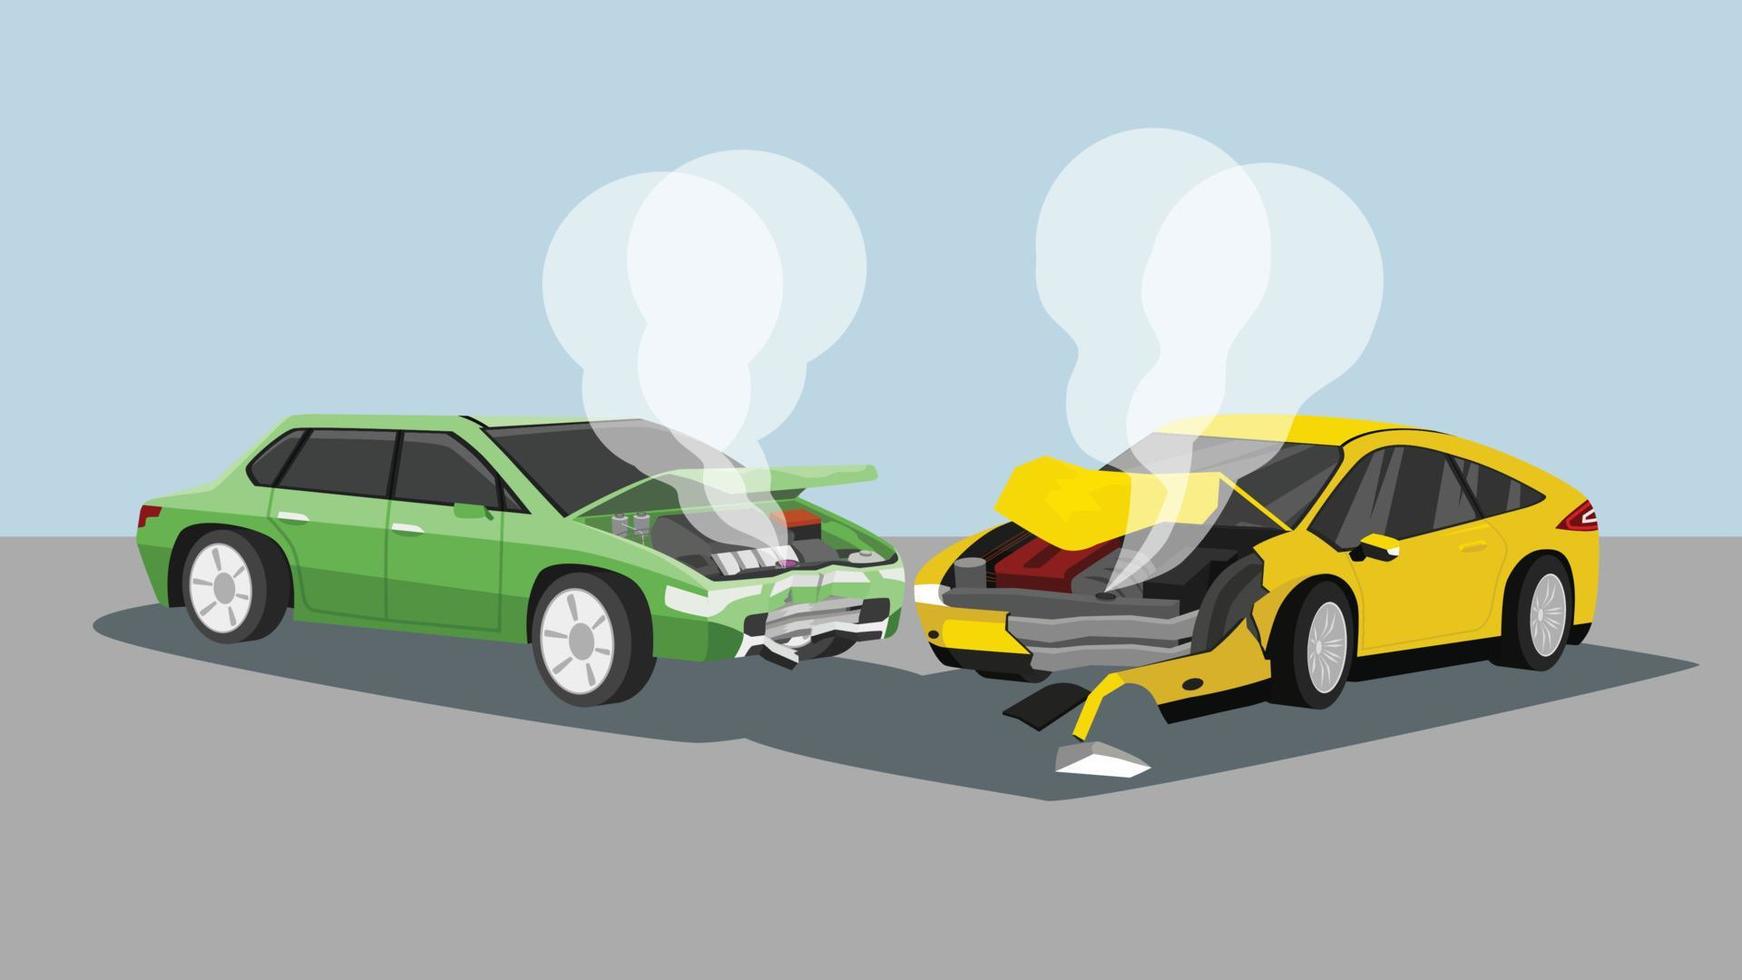 Illustiation and Vector. Two cars collide on the road. The front was badly damaged. Car was badly damaged and smoke was emanating from the radiator. Background of hafl gray and soft blue color. vector